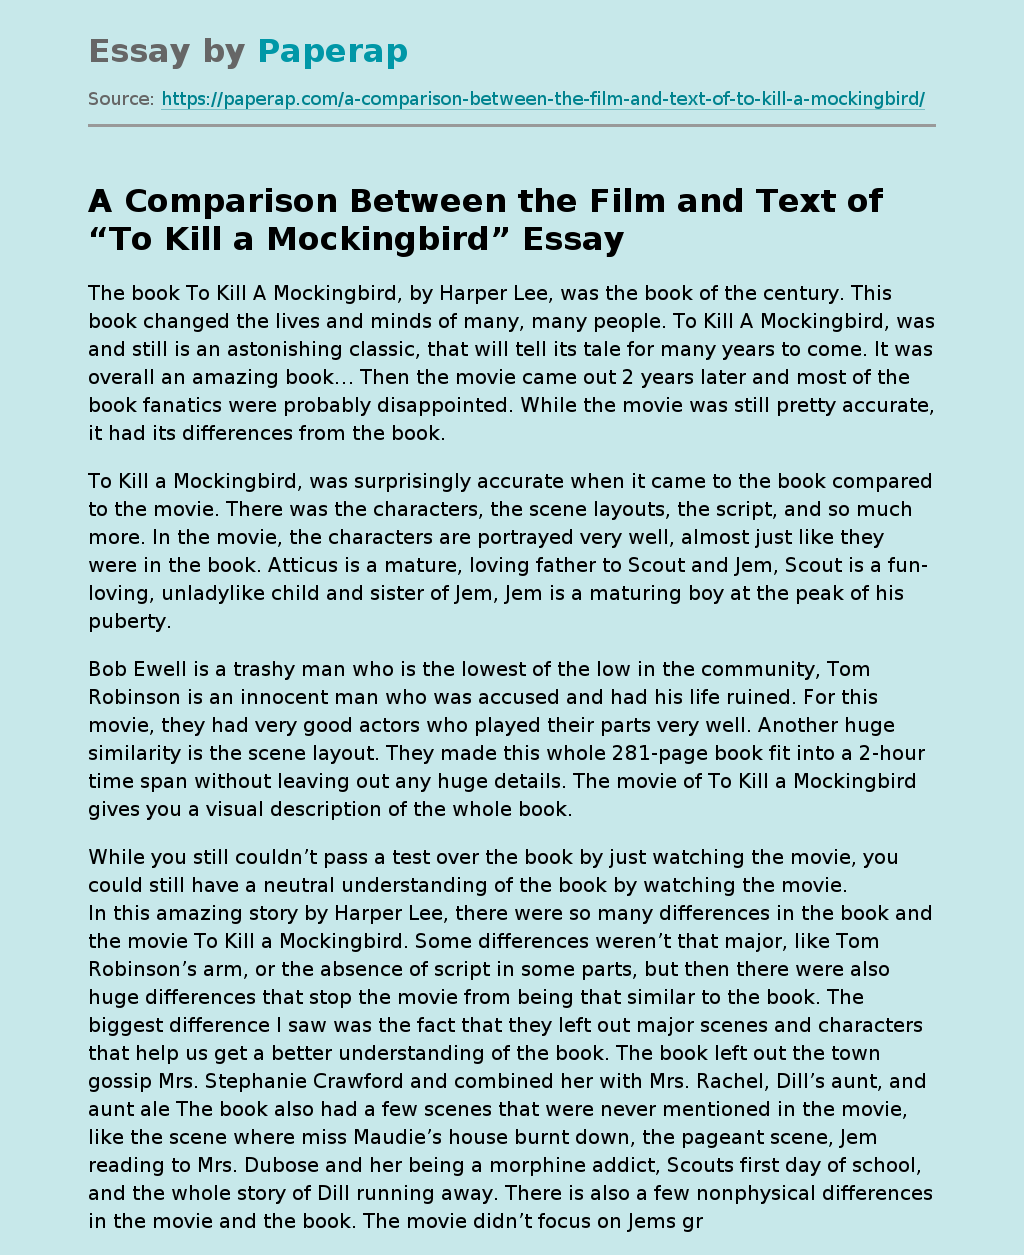 A Comparison Between the Film and Text of “To Kill a Mockingbird”